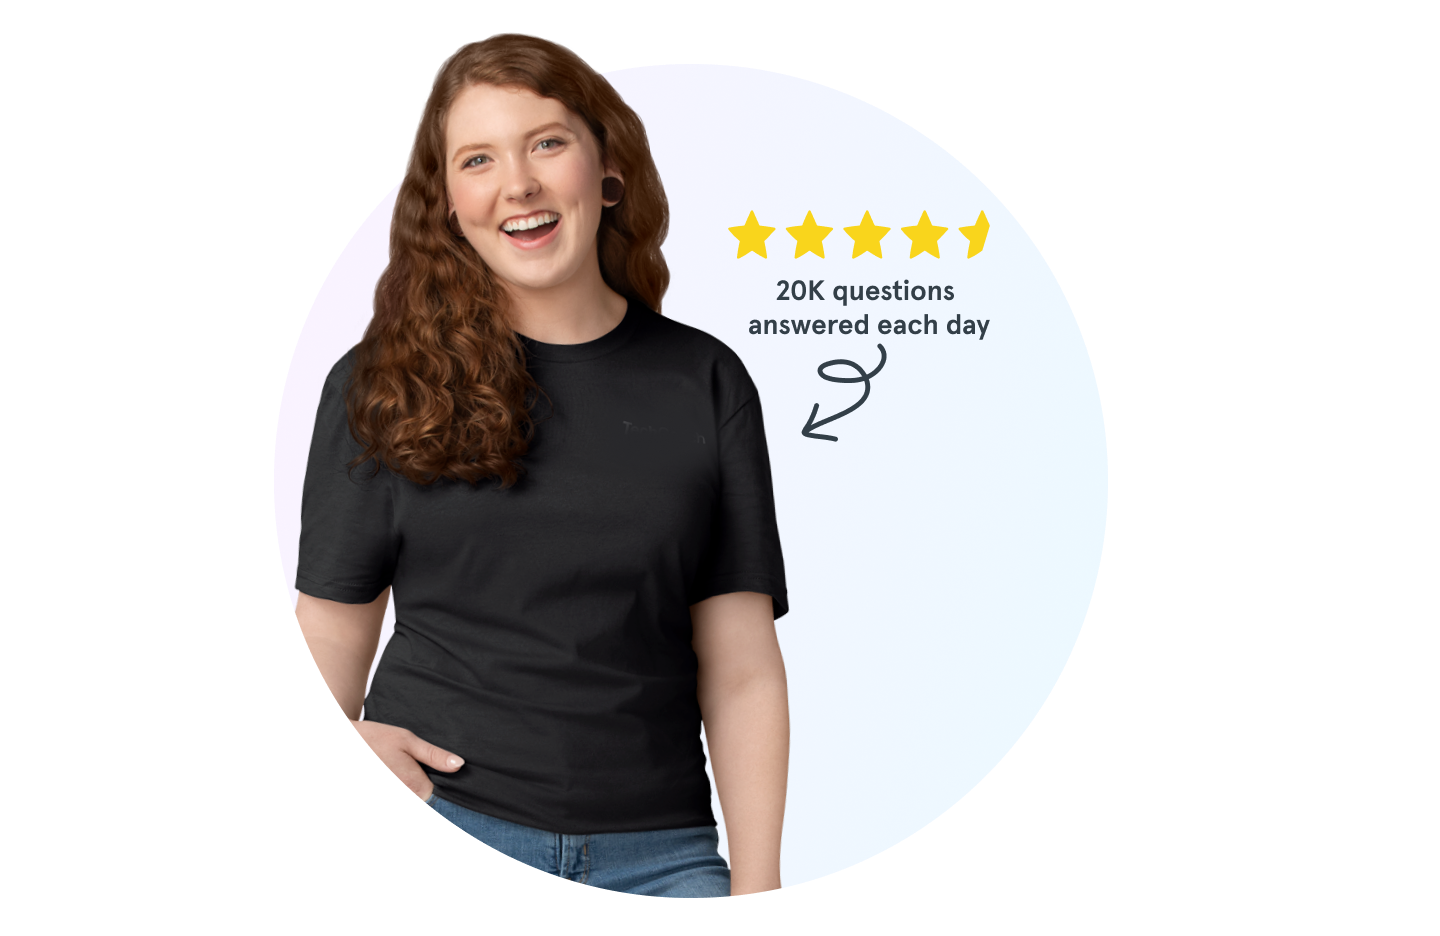 Woman with star ratings - 20k questions answered each day